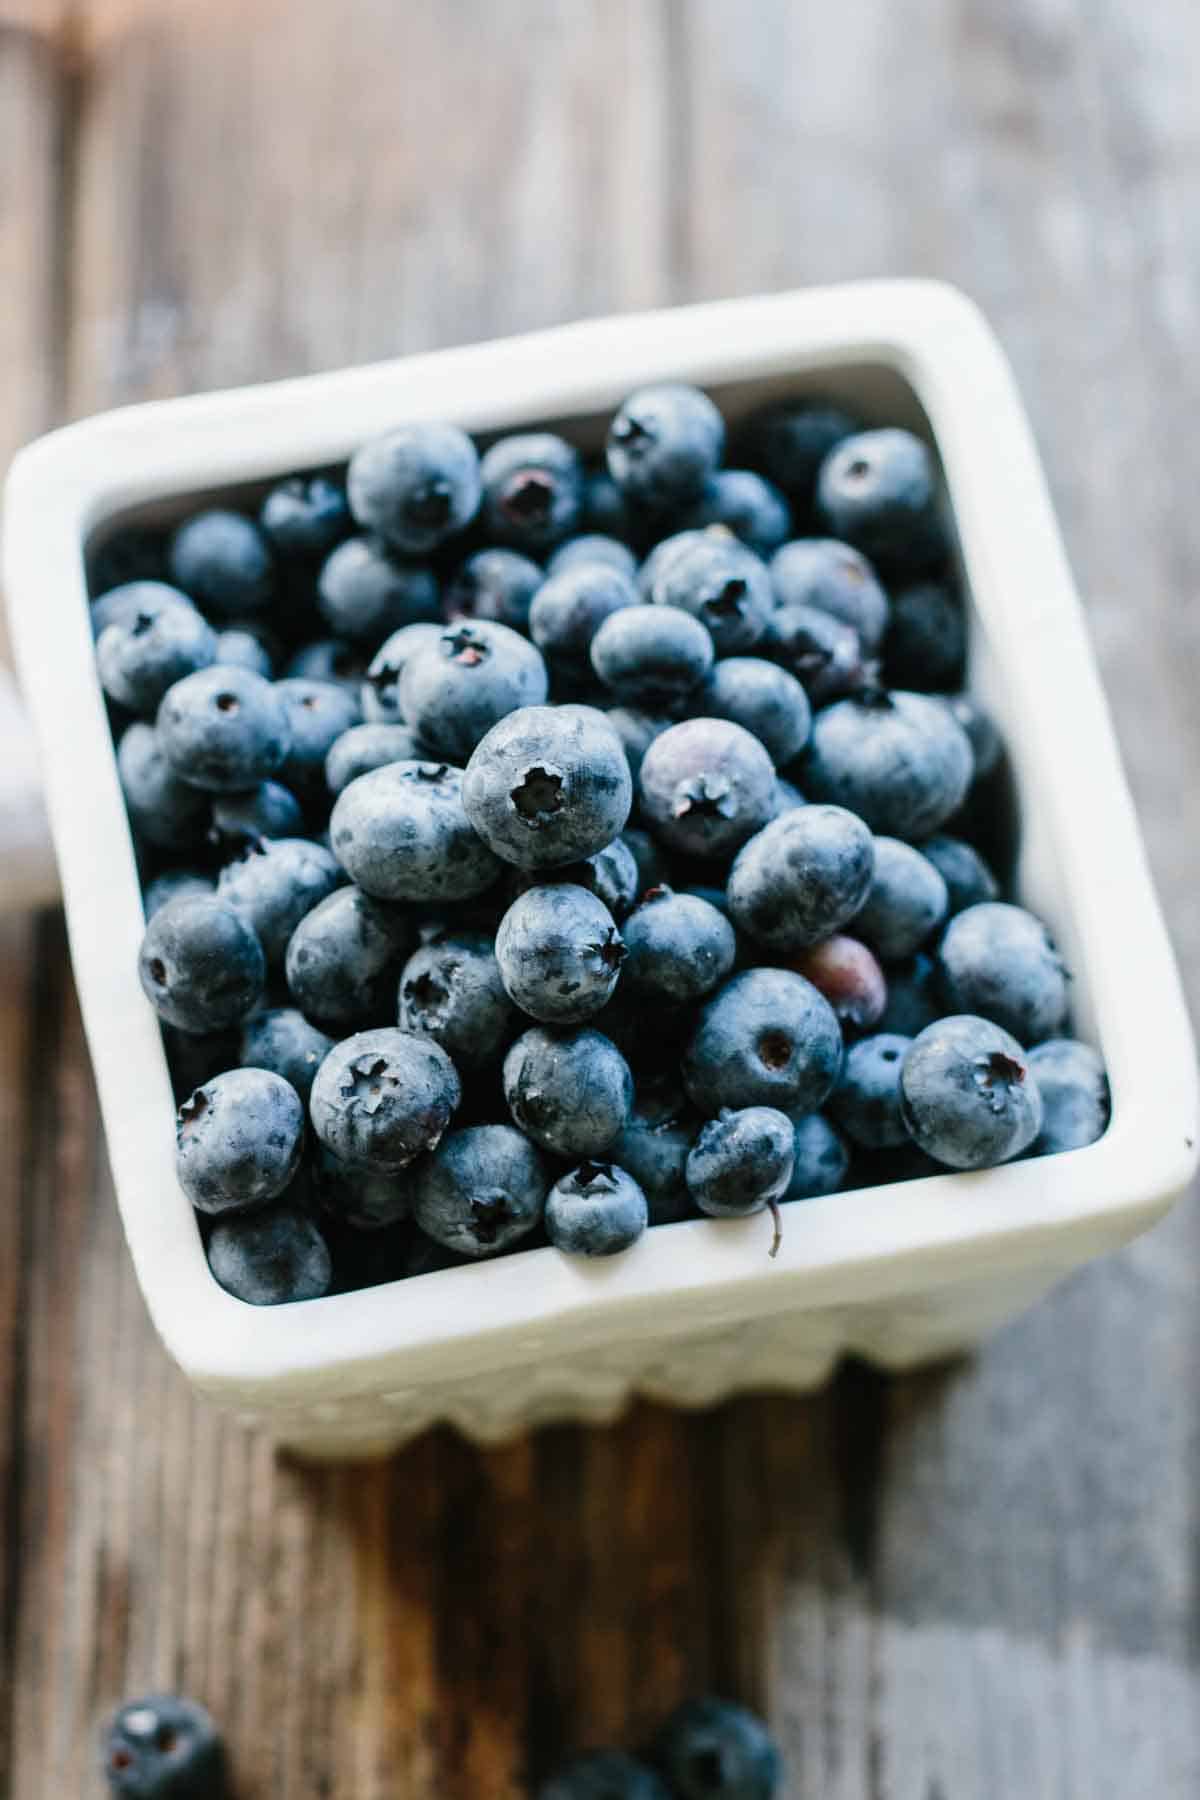 A ceramic pint container filled with fresh blueberries.